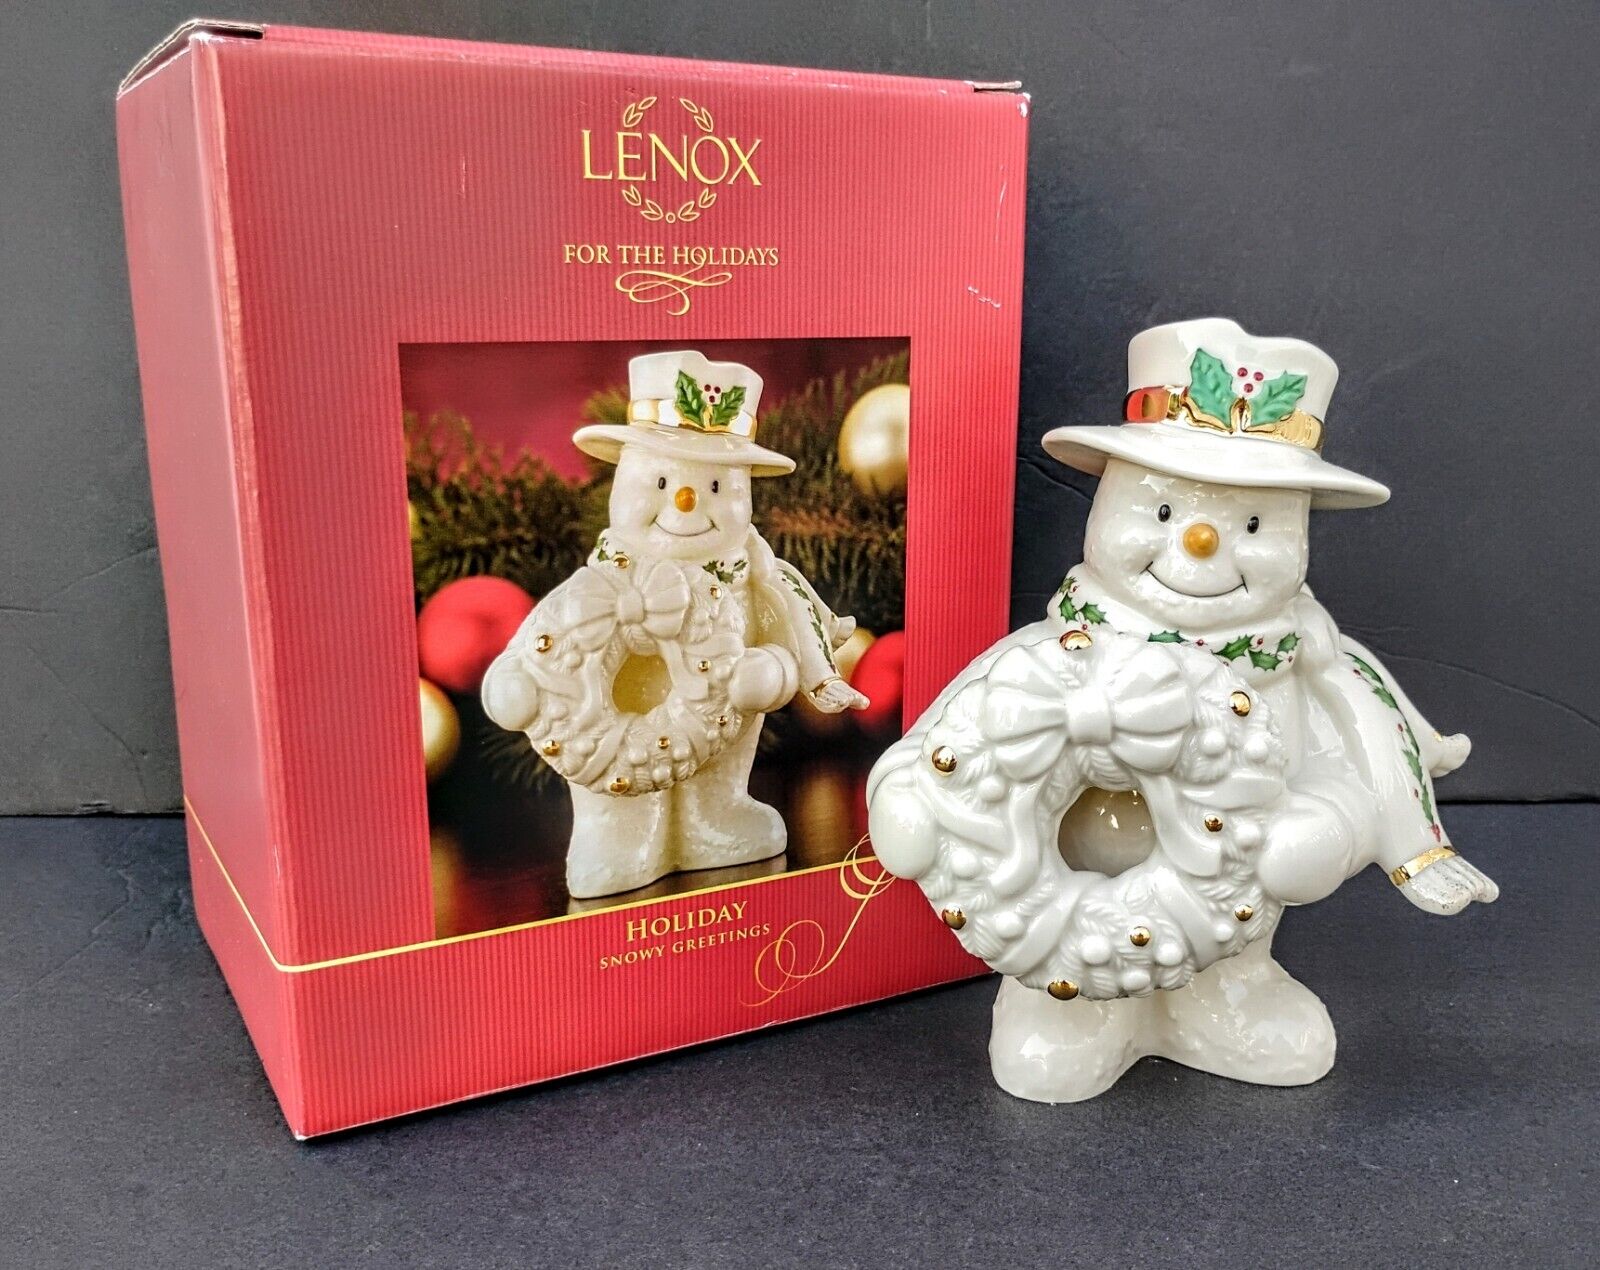 Lennox 2010 Holiday Snowy Greeting  Snowman Figurine Porcelain Gold Accents 